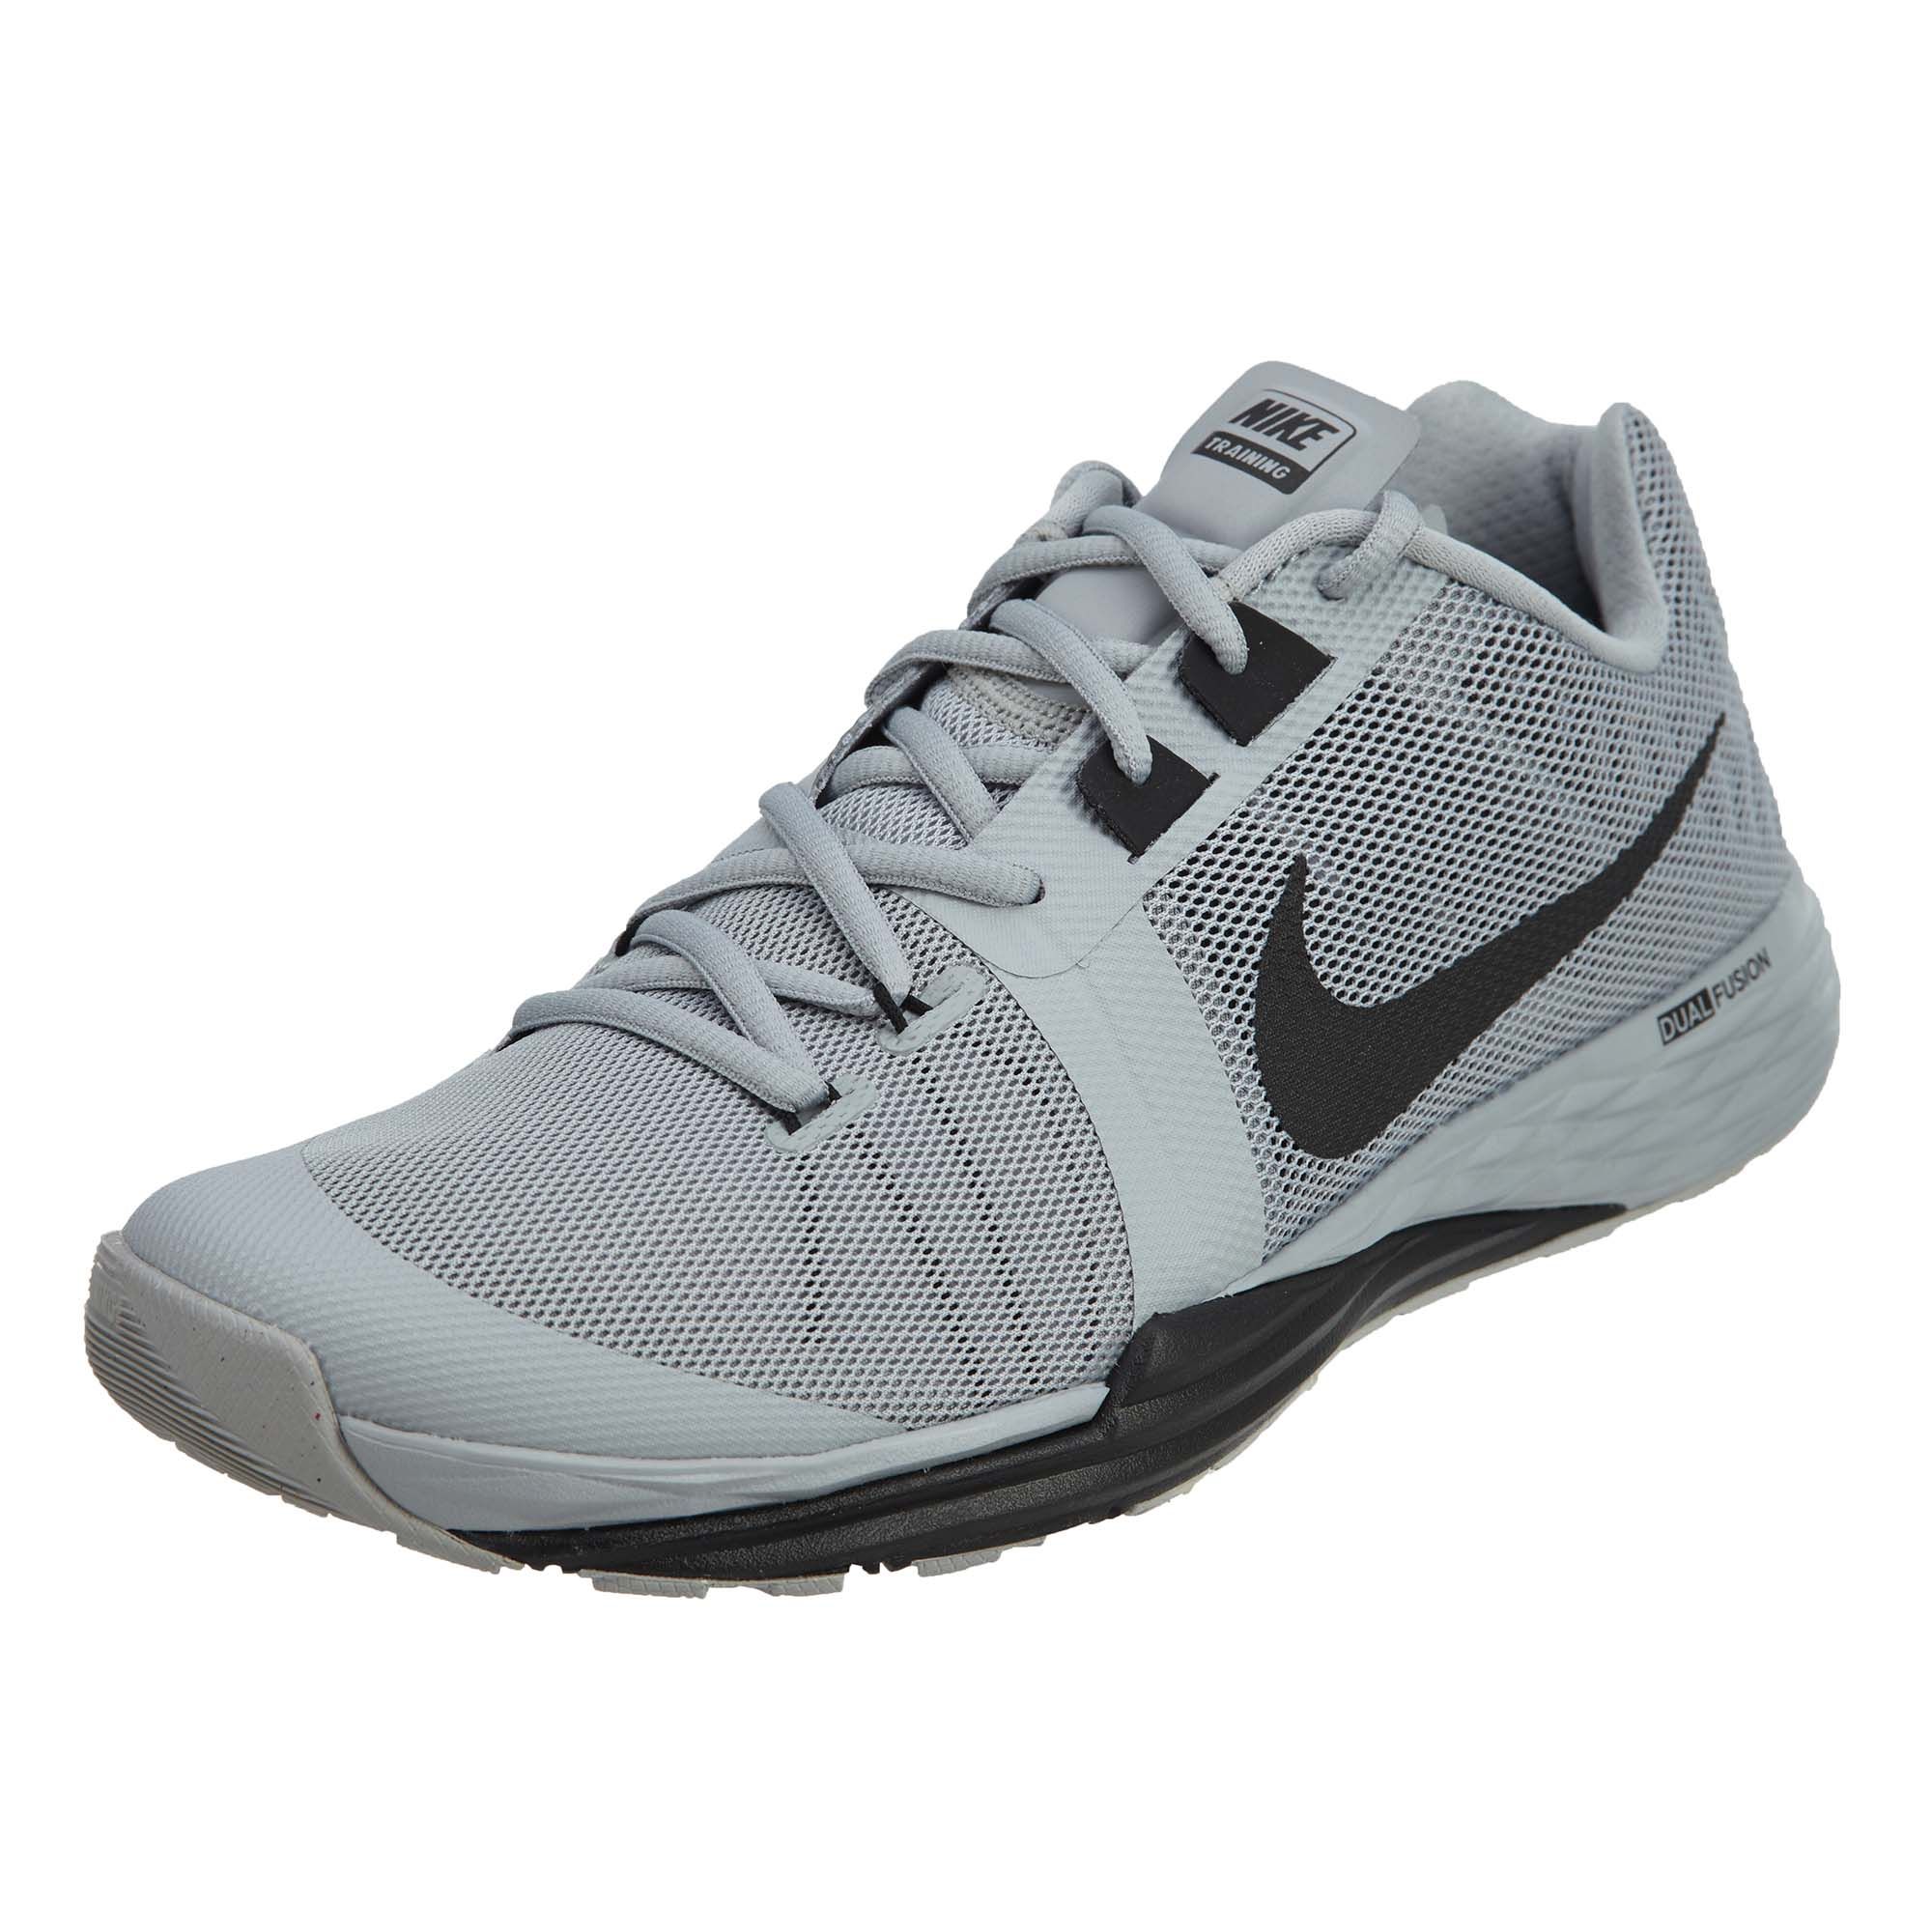 Nike Trainer Prime Iron Df Mens Style 